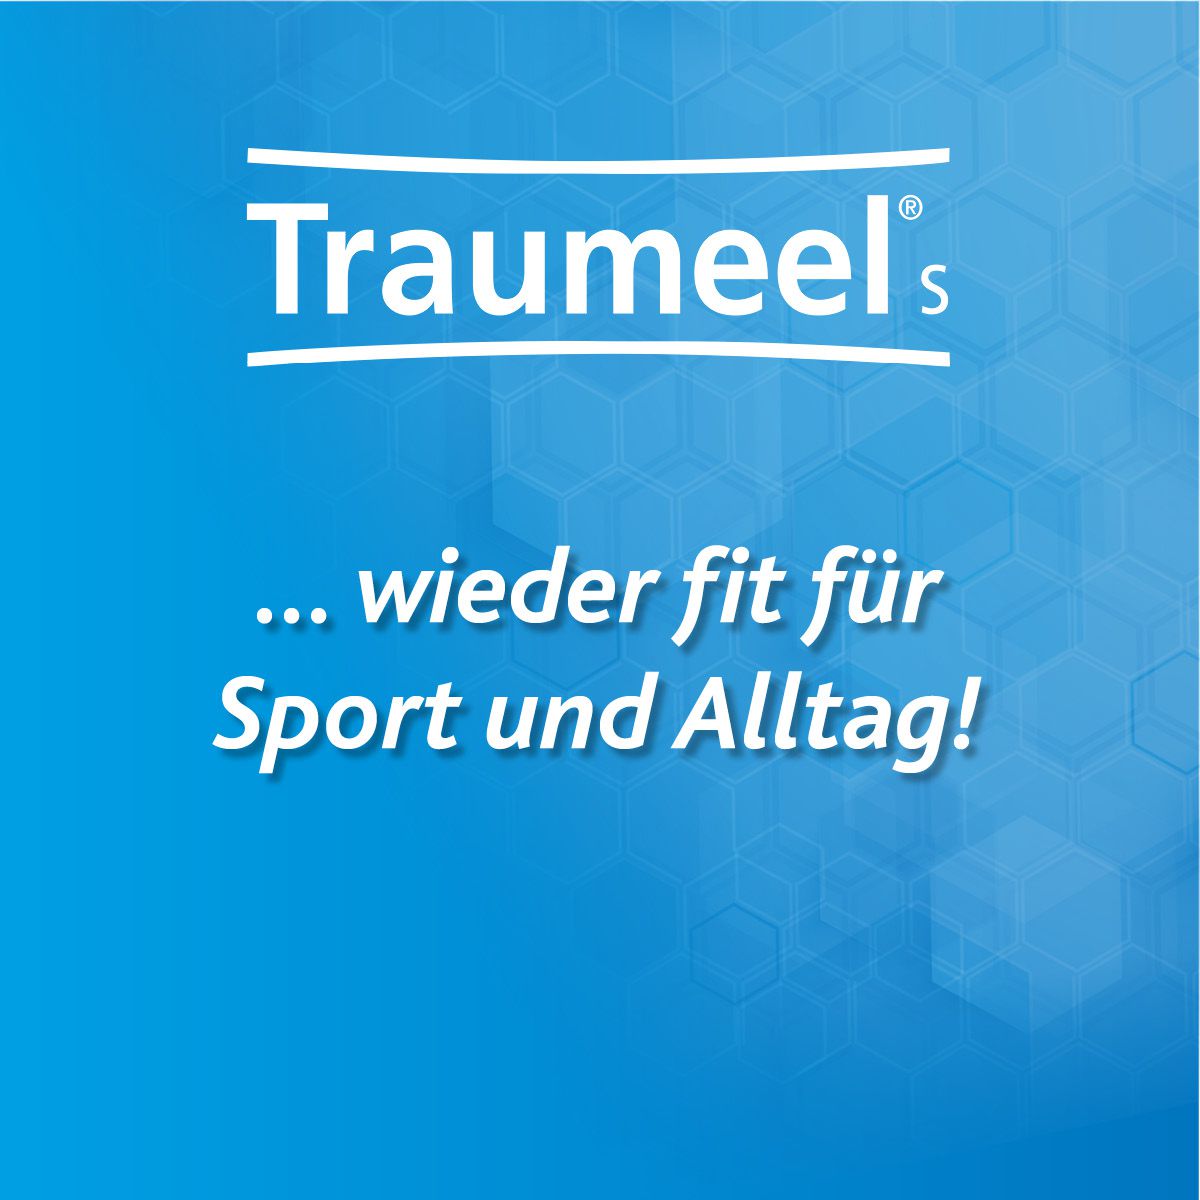 Traumeel S Tabletten &amp; Creme